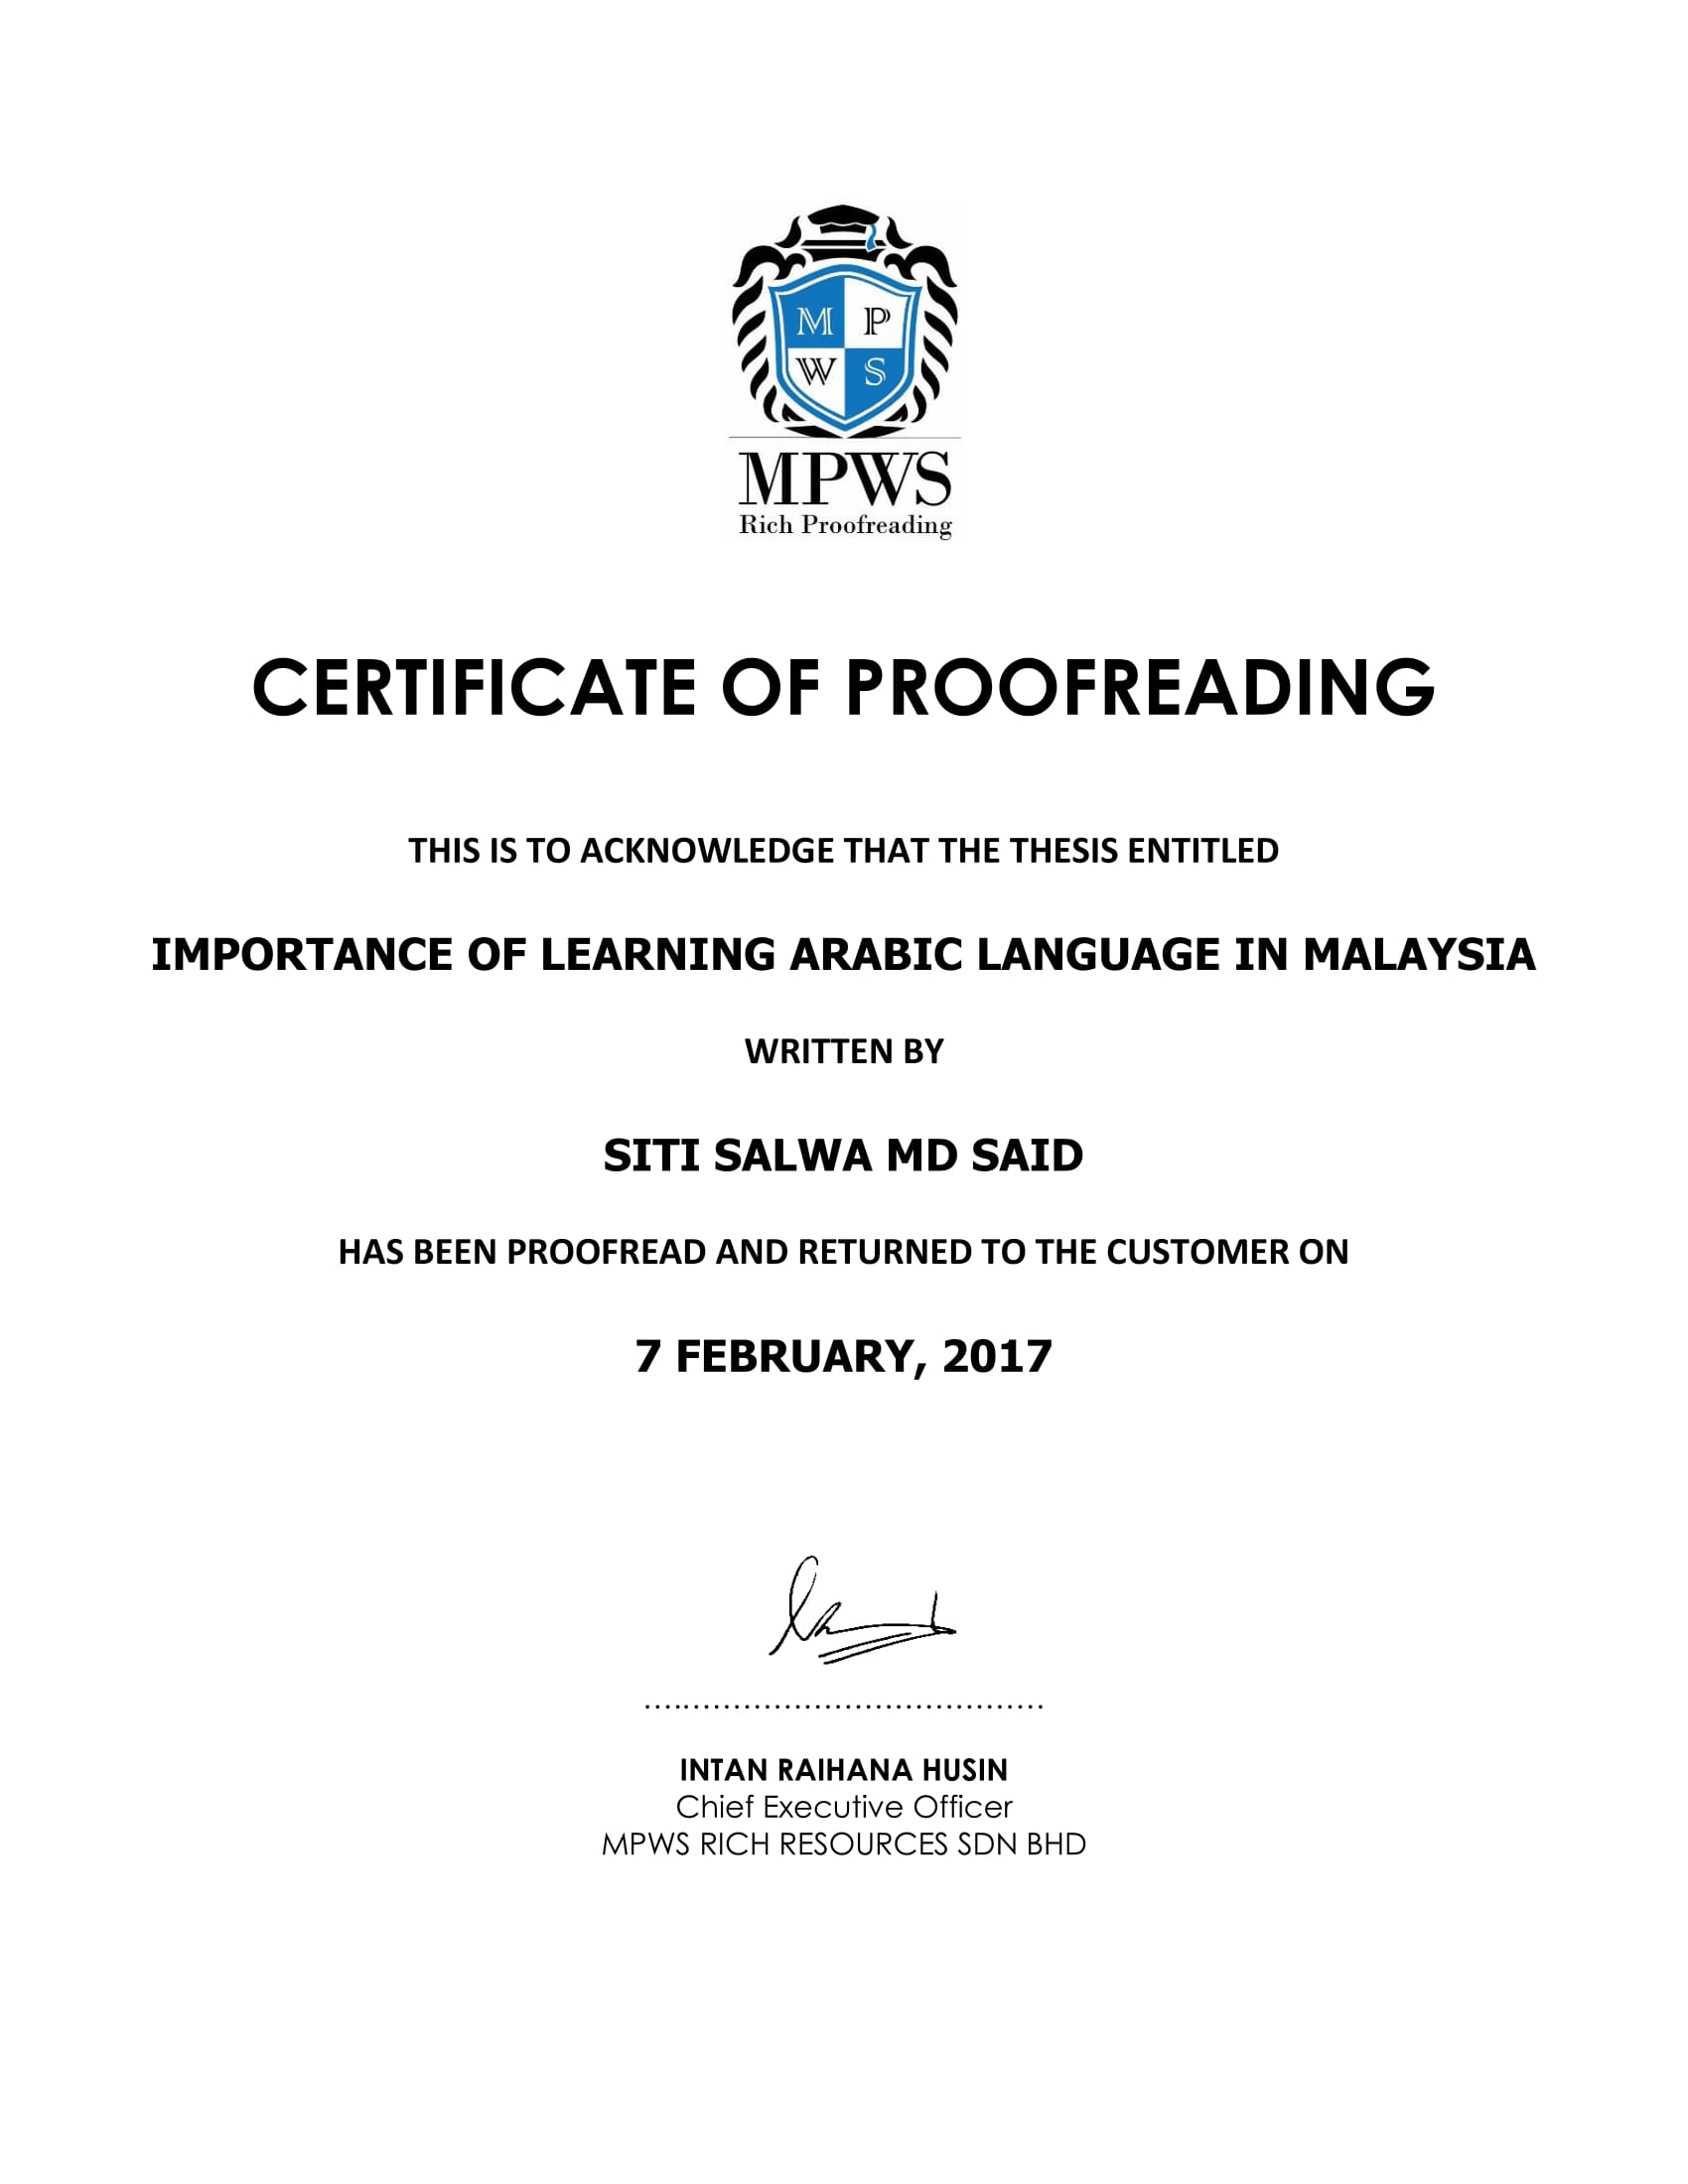 MPWS Rich Proofreading // Your #1 Trusted Proofreading Service in Malaysia